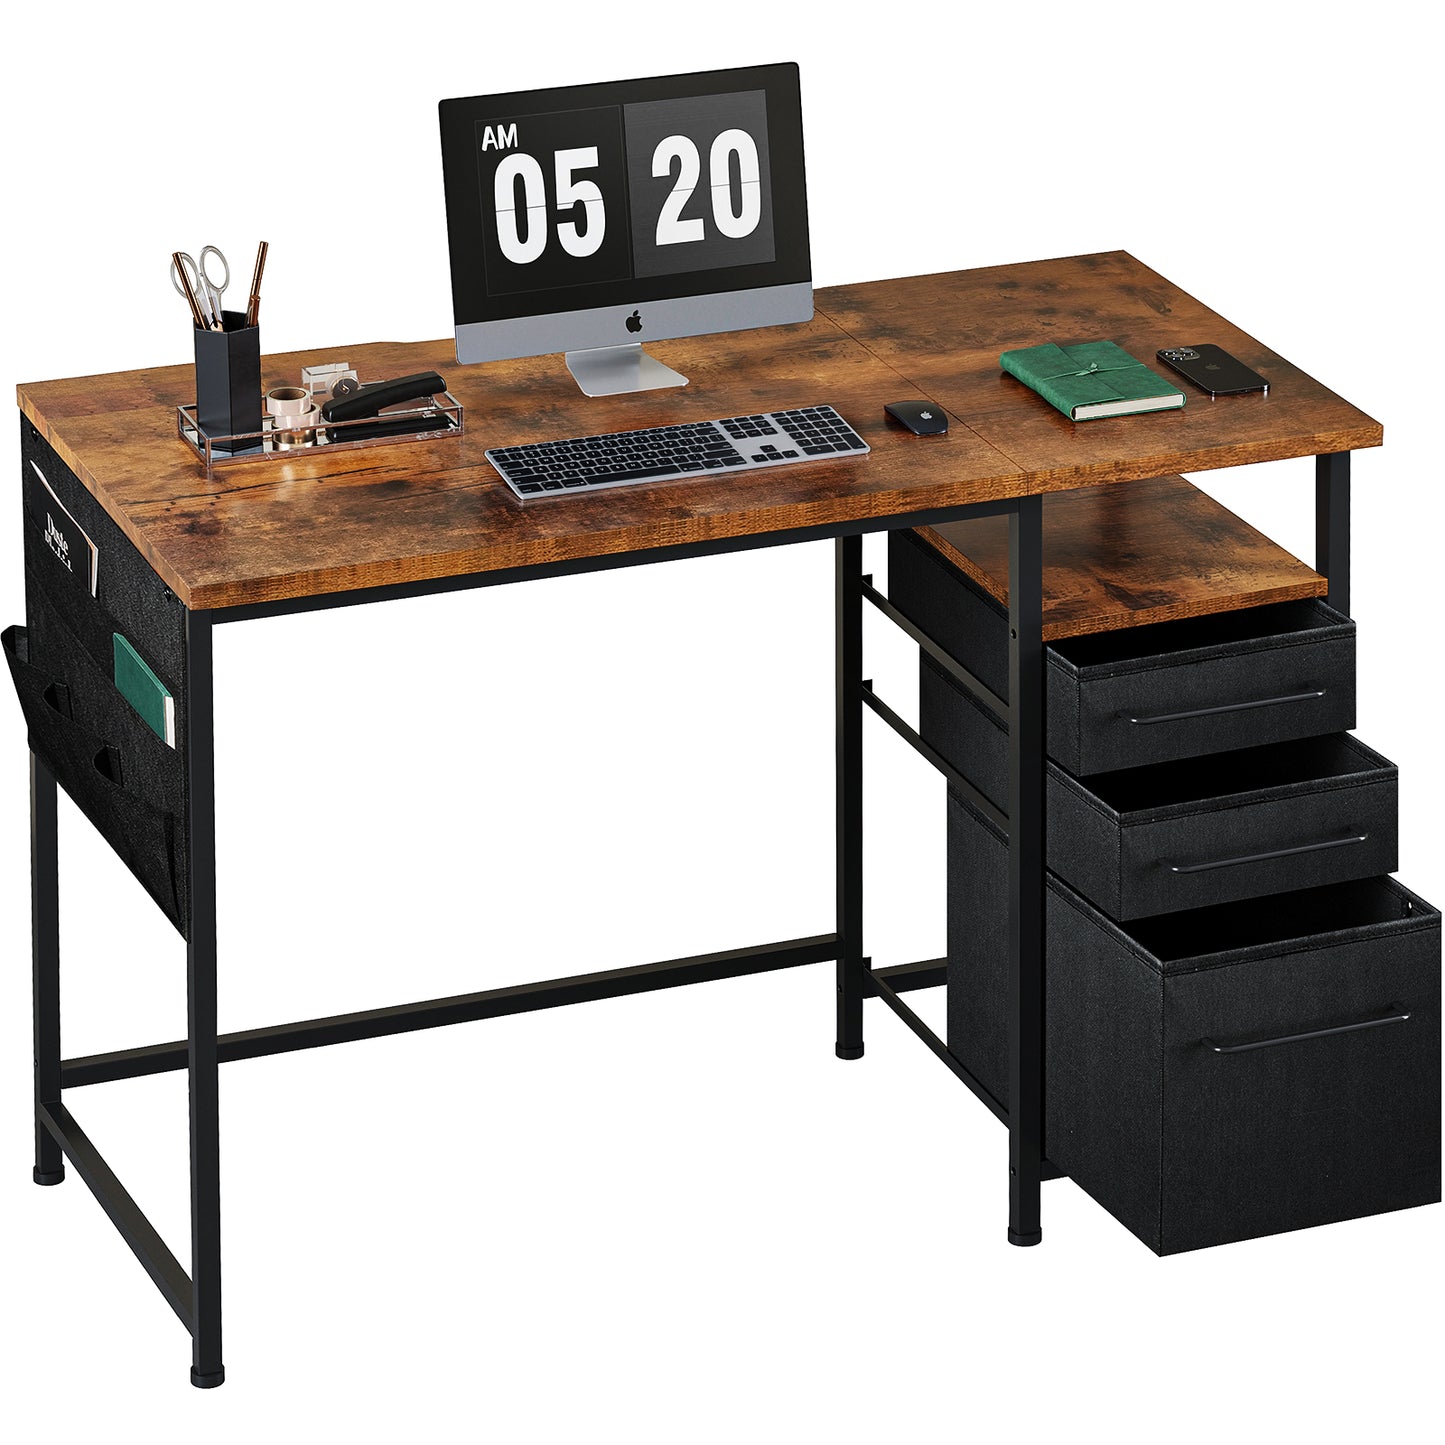 MAIHAIL 40 inch Desk with Drawers, Rustic Brown+ Black